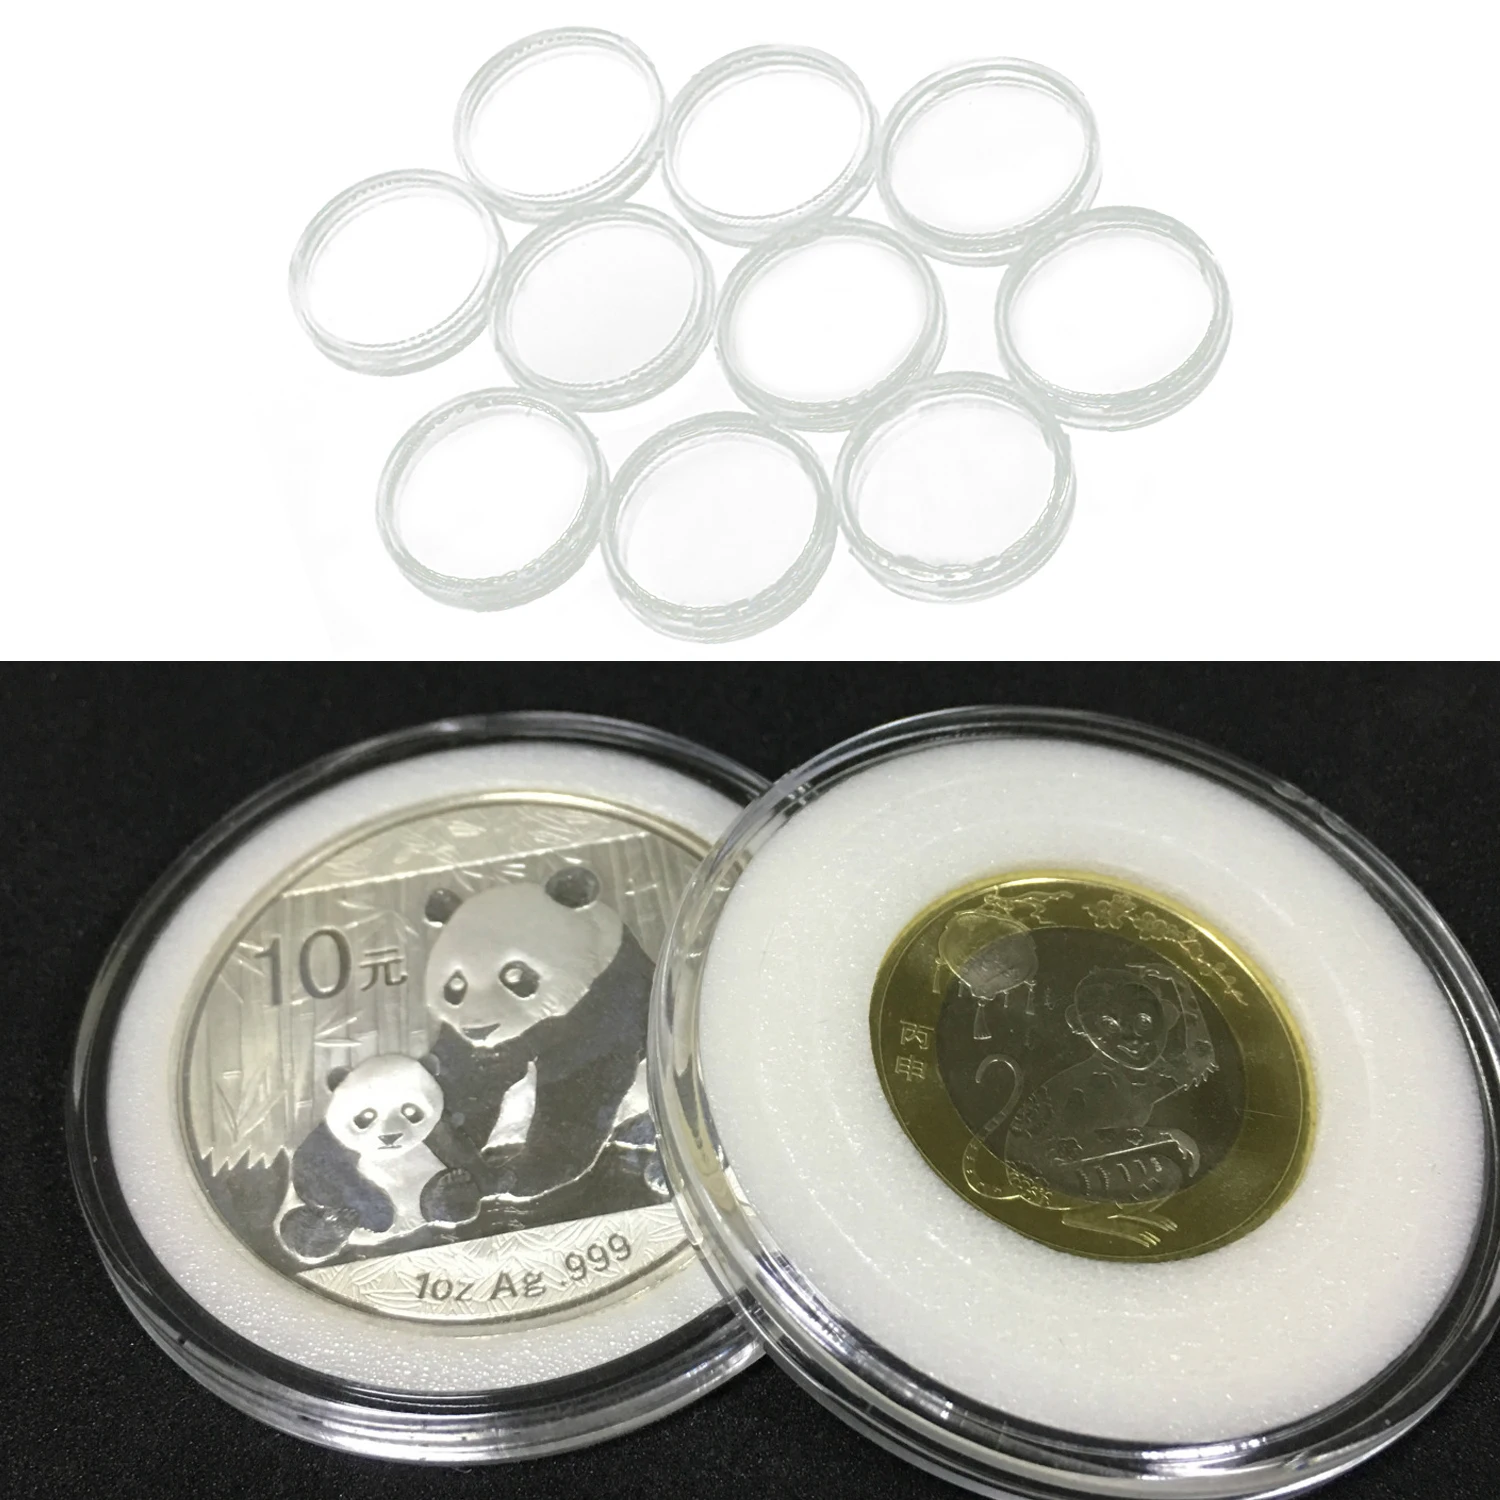 

10PCS 40mm Transparent Plastic Round Coin Cases Holder Capsules Container for Commemorative Coins Medal Collection DIY Craft Toy